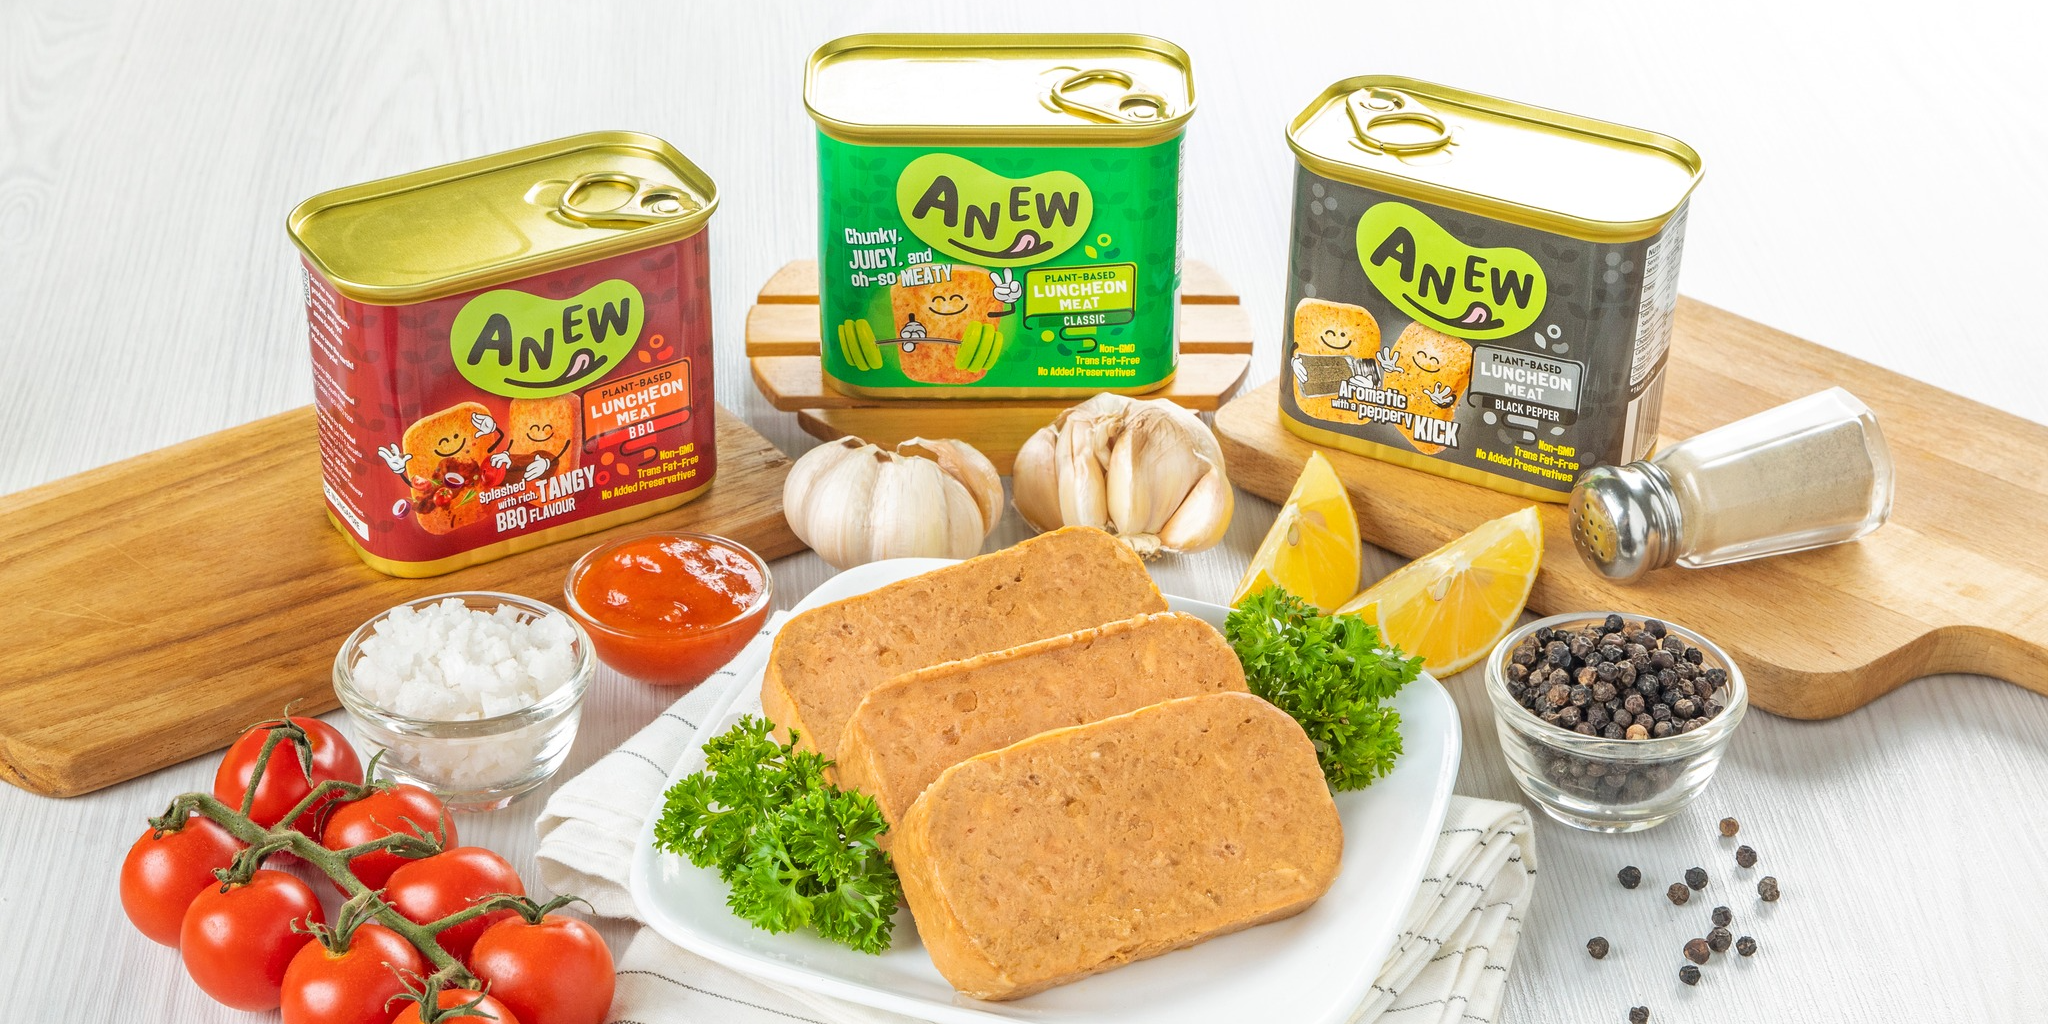 New plant-based luncheon meat ANEW as low as $4.95 – only at FairPrice!